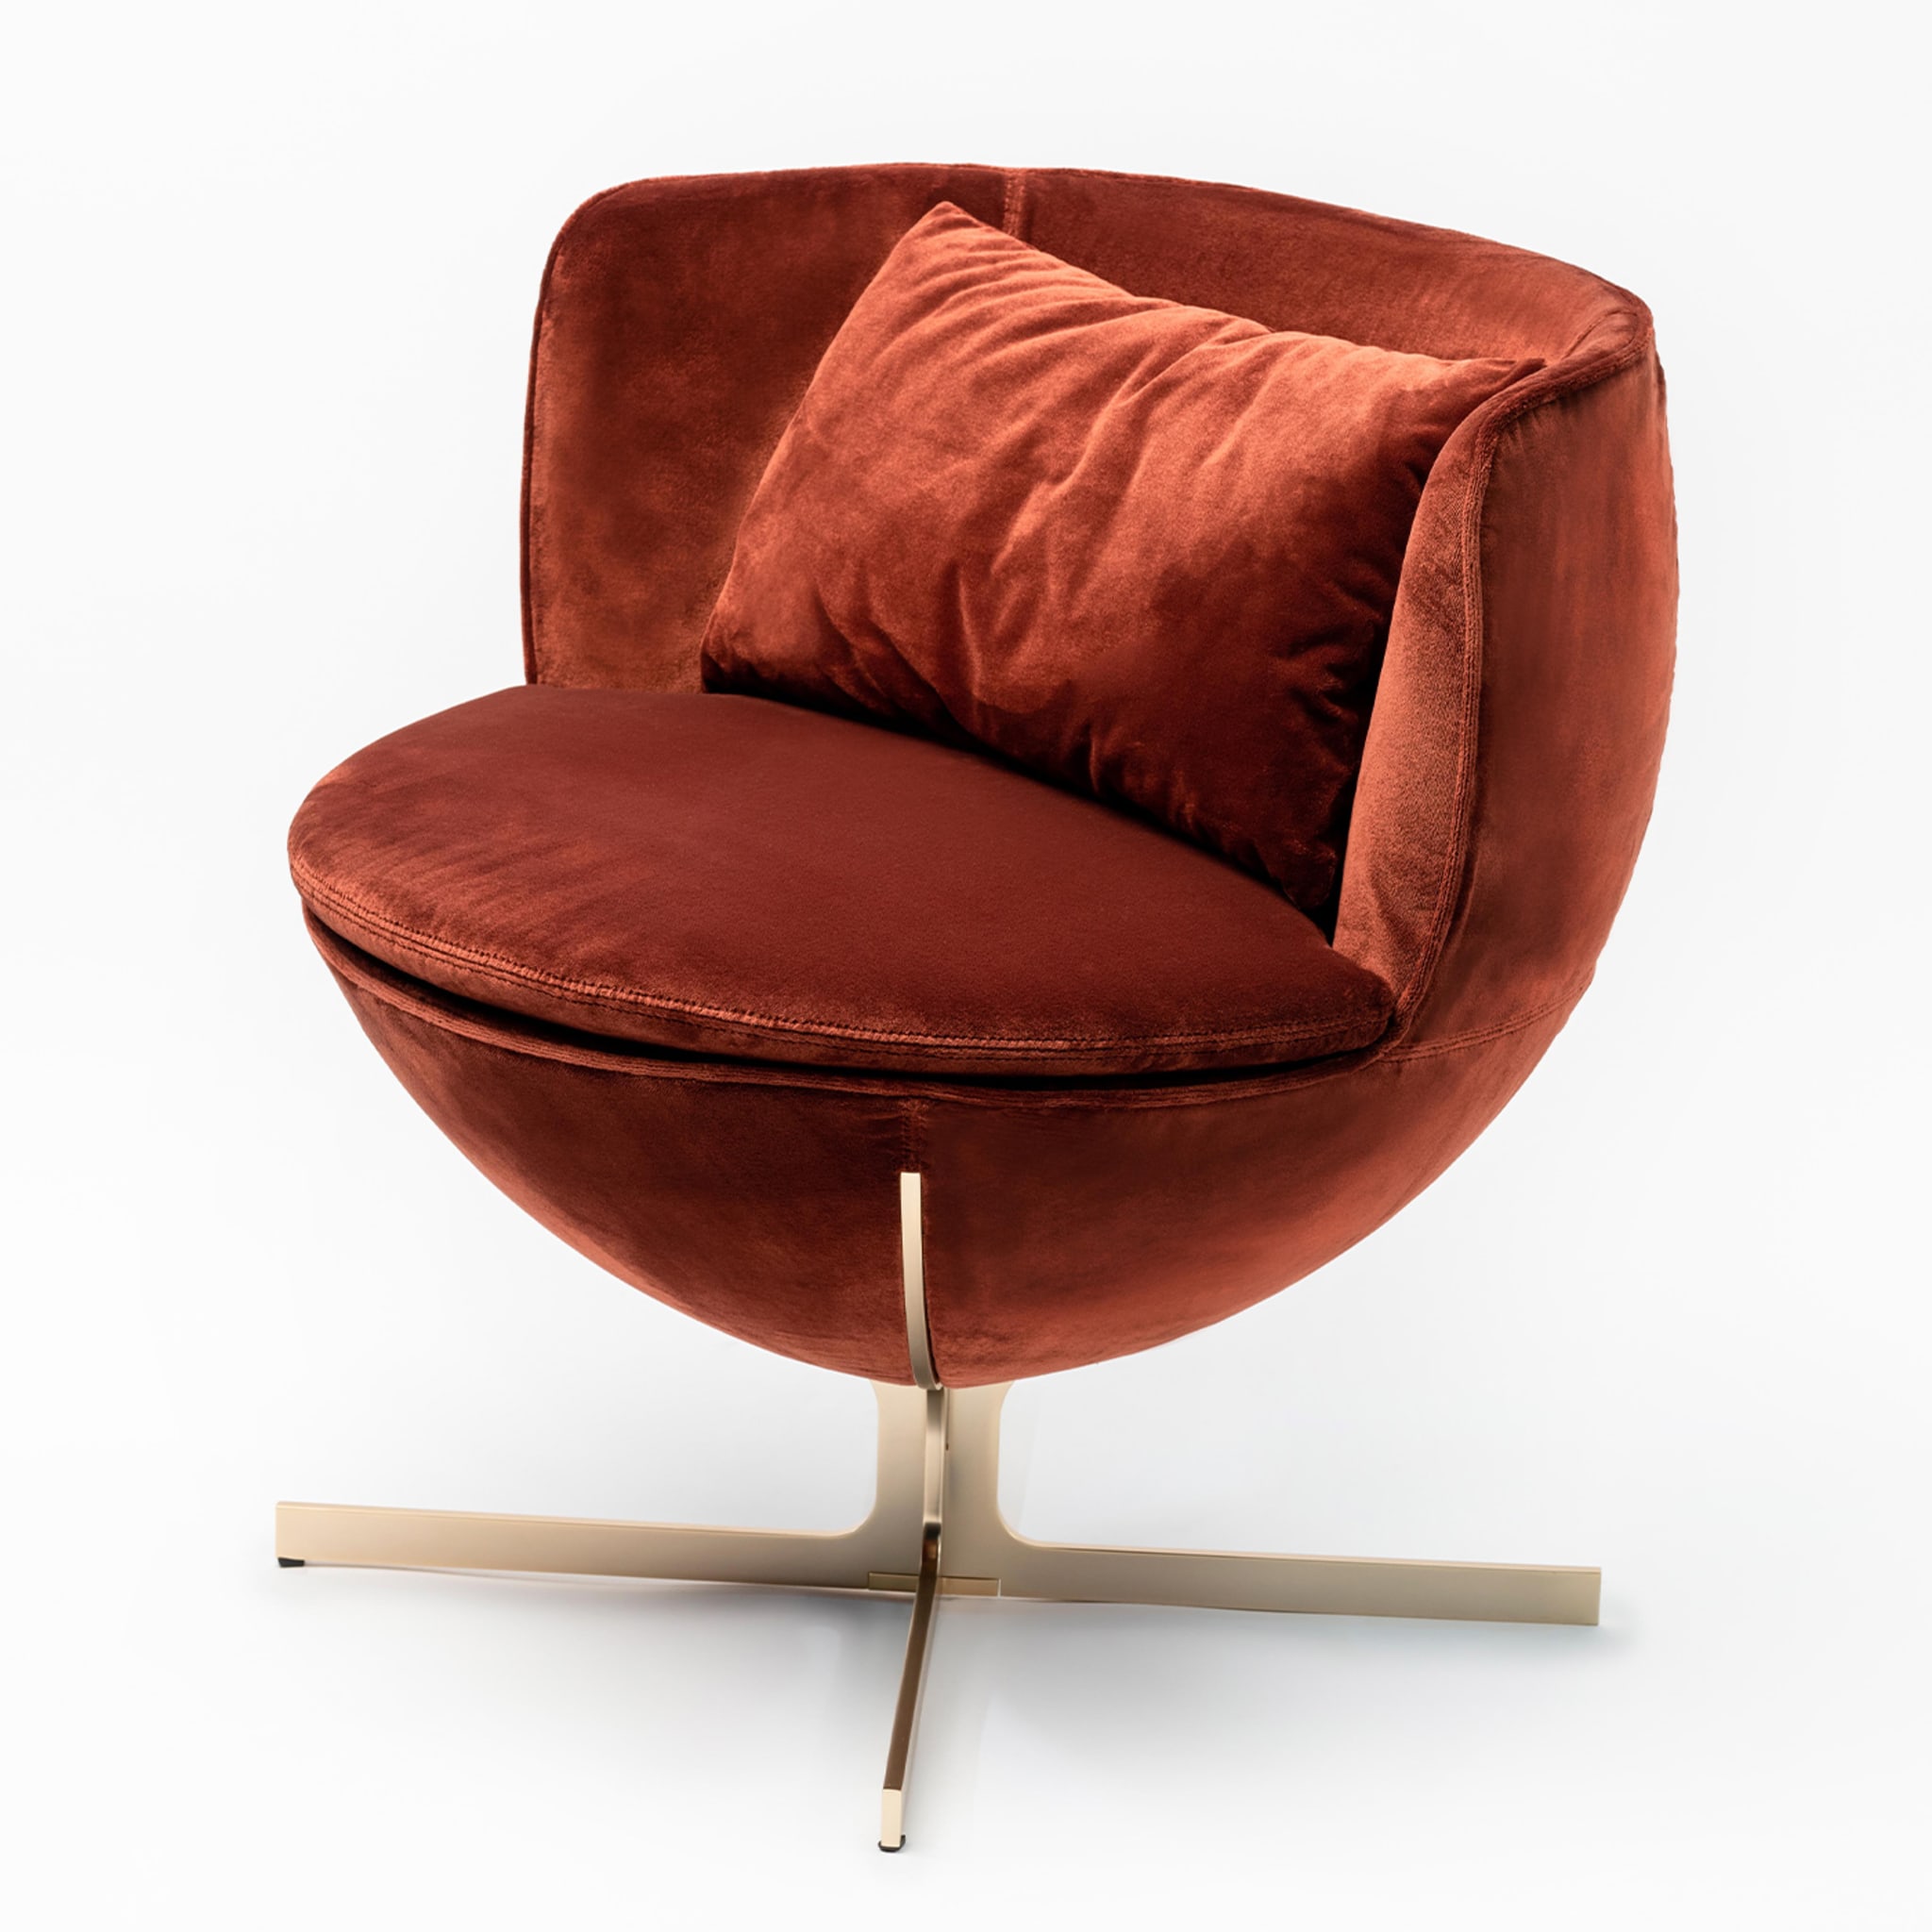 Calice Red Velvet Armchair by Patrick Norguet - Alternative view 1